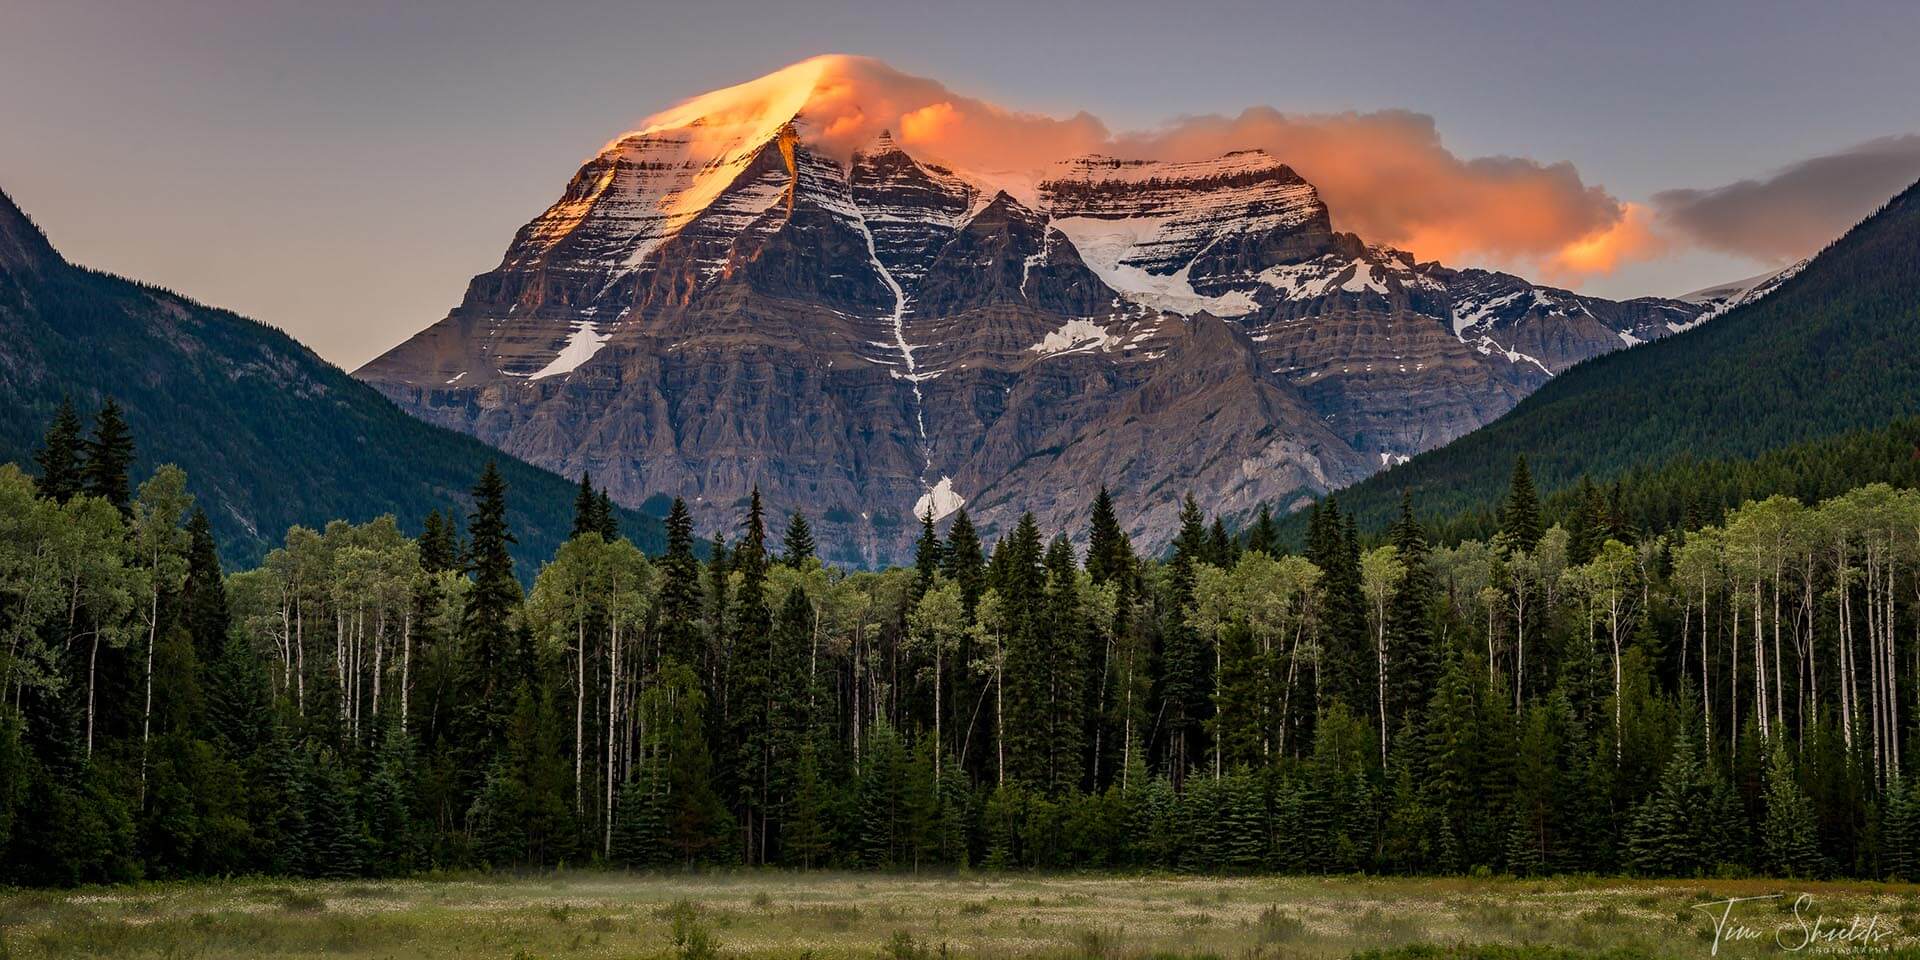 A photo of an iconic mountain in Banff National Park with the peak lit up with the dramatic, last light of day